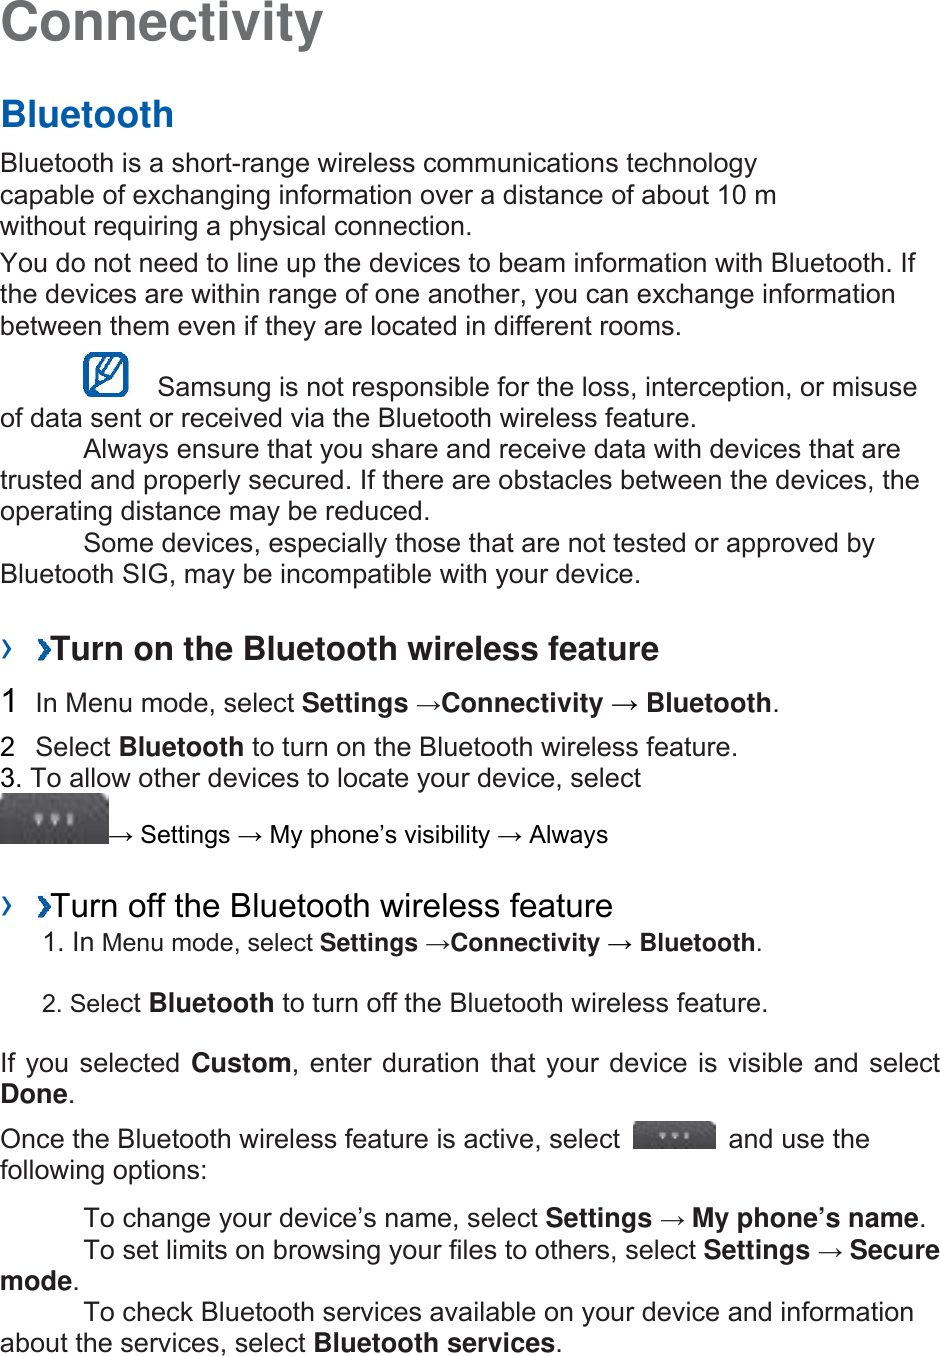 Connectivity   Bluetooth   Bluetooth is a short-range wireless communications technology capable of exchanging information over a distance of about 10 m without requiring a physical connection.   You do not need to line up the devices to beam information with Bluetooth. If the devices are within range of one another, you can exchange information between them even if they are located in different rooms.      Samsung is not responsible for the loss, interception, or misuse of data sent or received via the Bluetooth wireless feature.     Always ensure that you share and receive data with devices that are trusted and properly secured. If there are obstacles between the devices, the operating distance may be reduced.     Some devices, especially those that are not tested or approved by Bluetooth SIG, may be incompatible with your device.    ›  Turn on the Bluetooth wireless feature   1  In Menu mode, select Settings →Connectivity → Bluetooth.  2  Select Bluetooth to turn on the Bluetooth wireless feature. 3. To allow other devices to locate your device, select   → Settings → My phone’s visibility → Always    ›  Turn off the Bluetooth wireless feature   1. In Menu mode, select Settings →Connectivity → Bluetooth. 2. Select Bluetooth to turn off the Bluetooth wireless feature. If you selected Custom, enter duration that your device is visible and select Done.  Once the Bluetooth wireless feature is active, select    and use the following options:     To change your device’s name, select Settings → My phone’s name.    To set limits on browsing your files to others, select Settings → Secure mode.    To check Bluetooth services available on your device and information about the services, select Bluetooth services.   